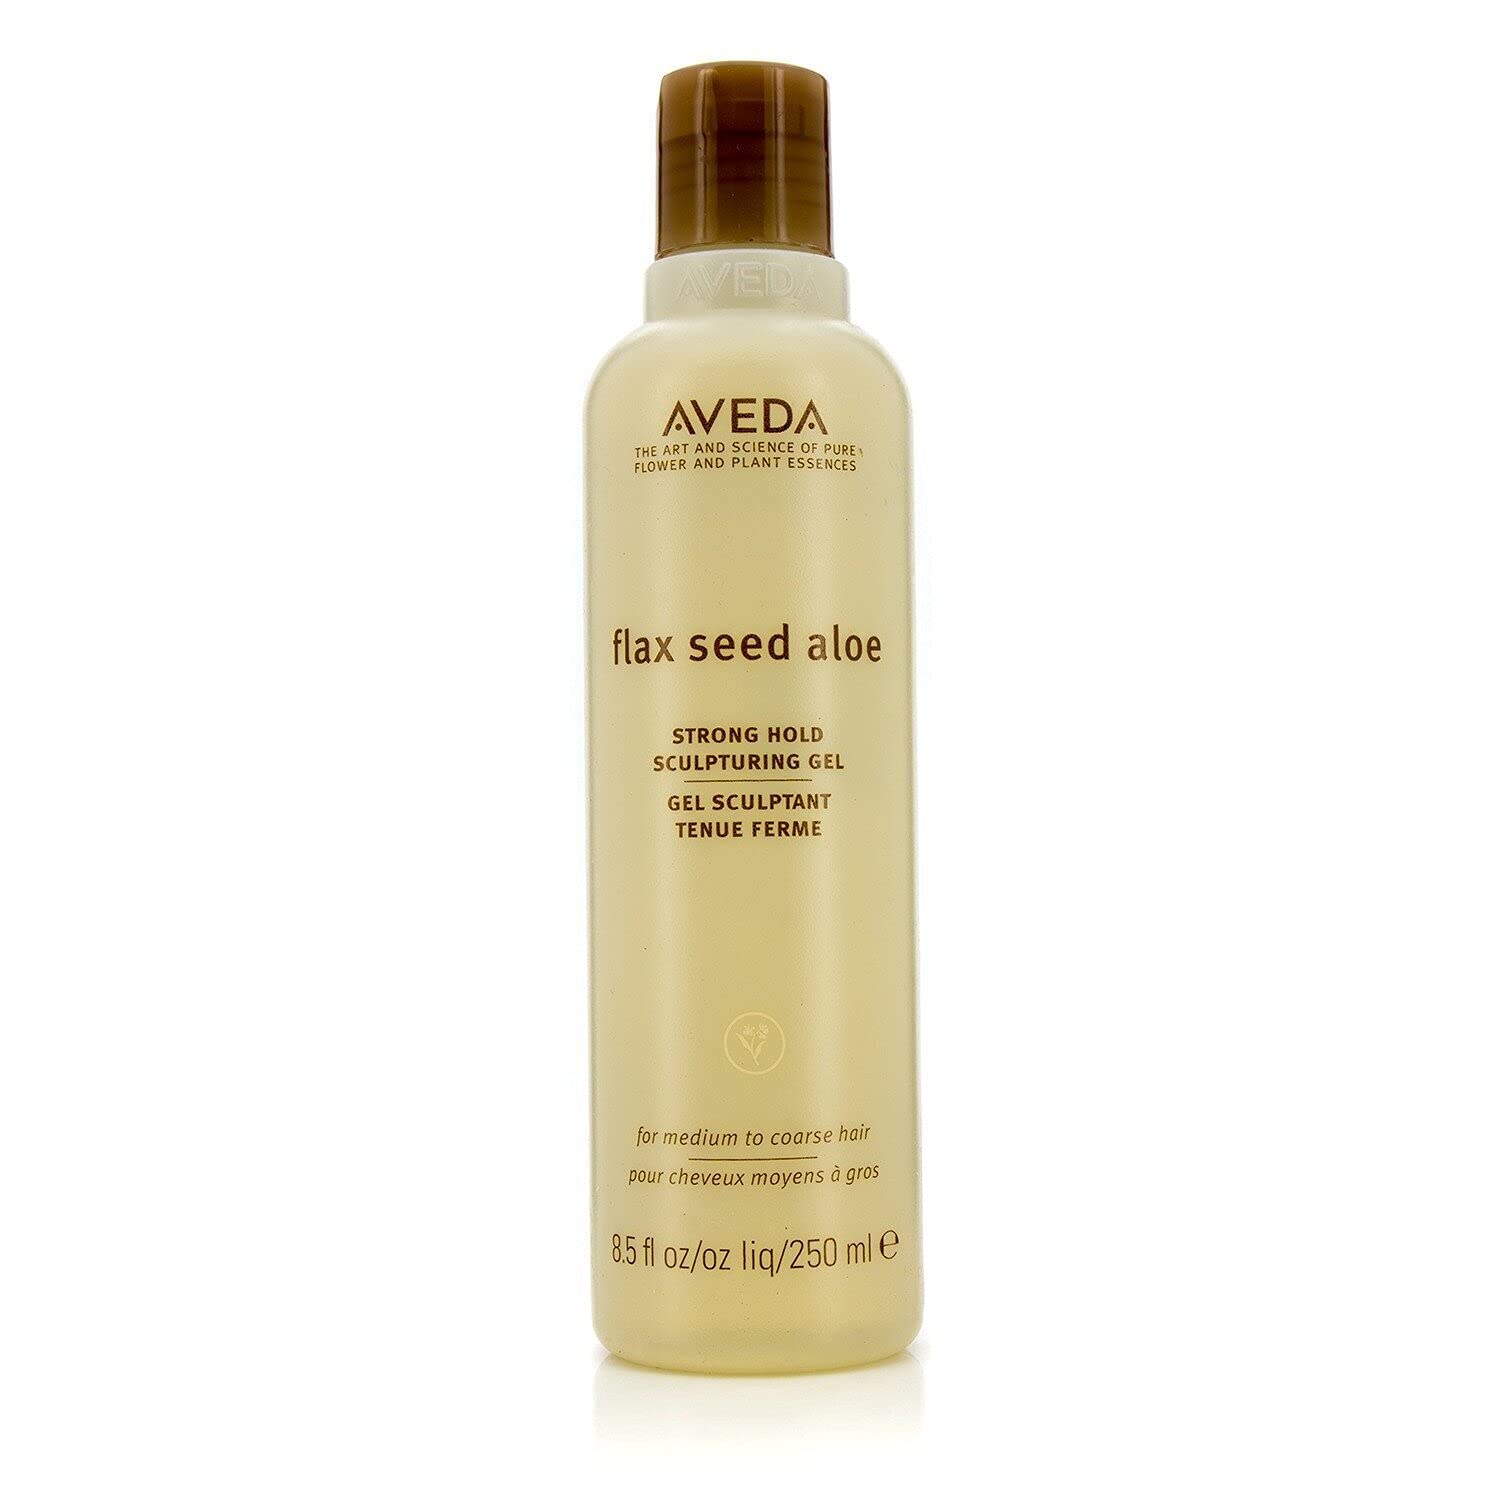 AVEDA Flax Seed Aloe Strong Hold Sculpturing Gel, 250 ml